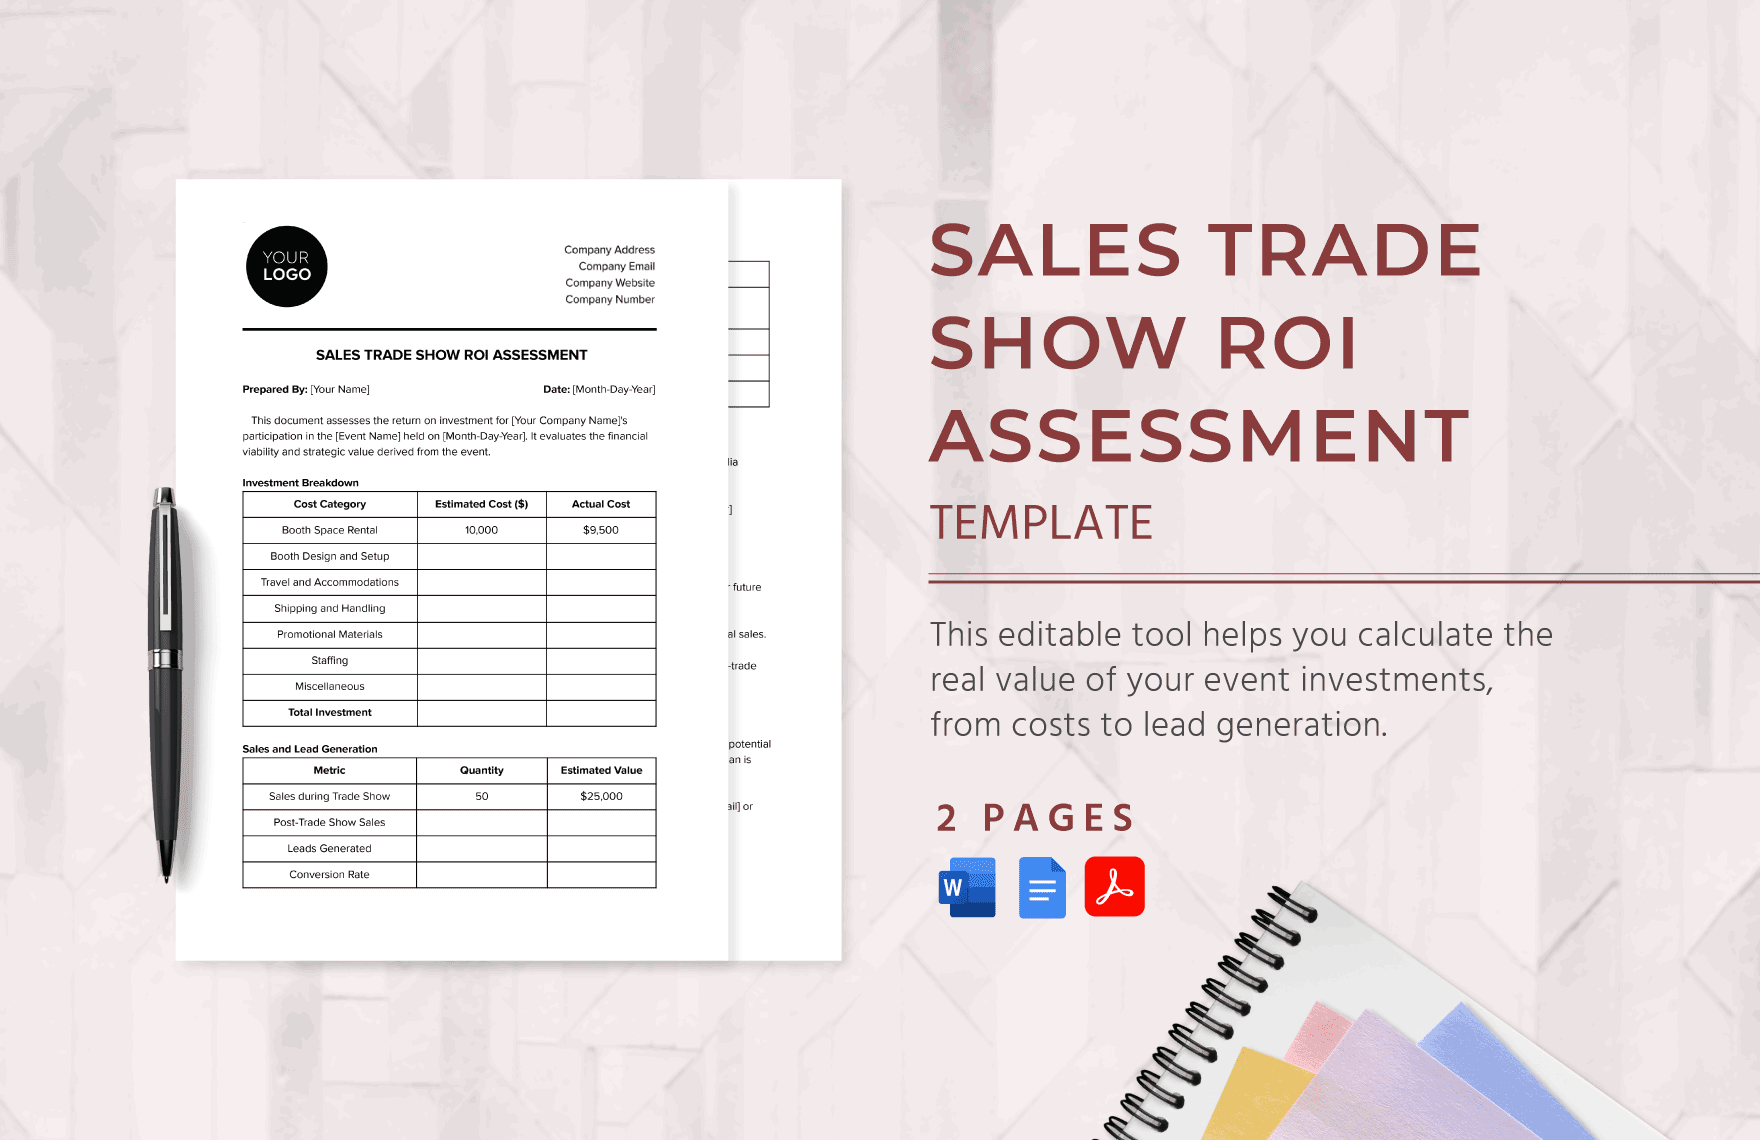 Sales Trade Show ROI Assessment Template